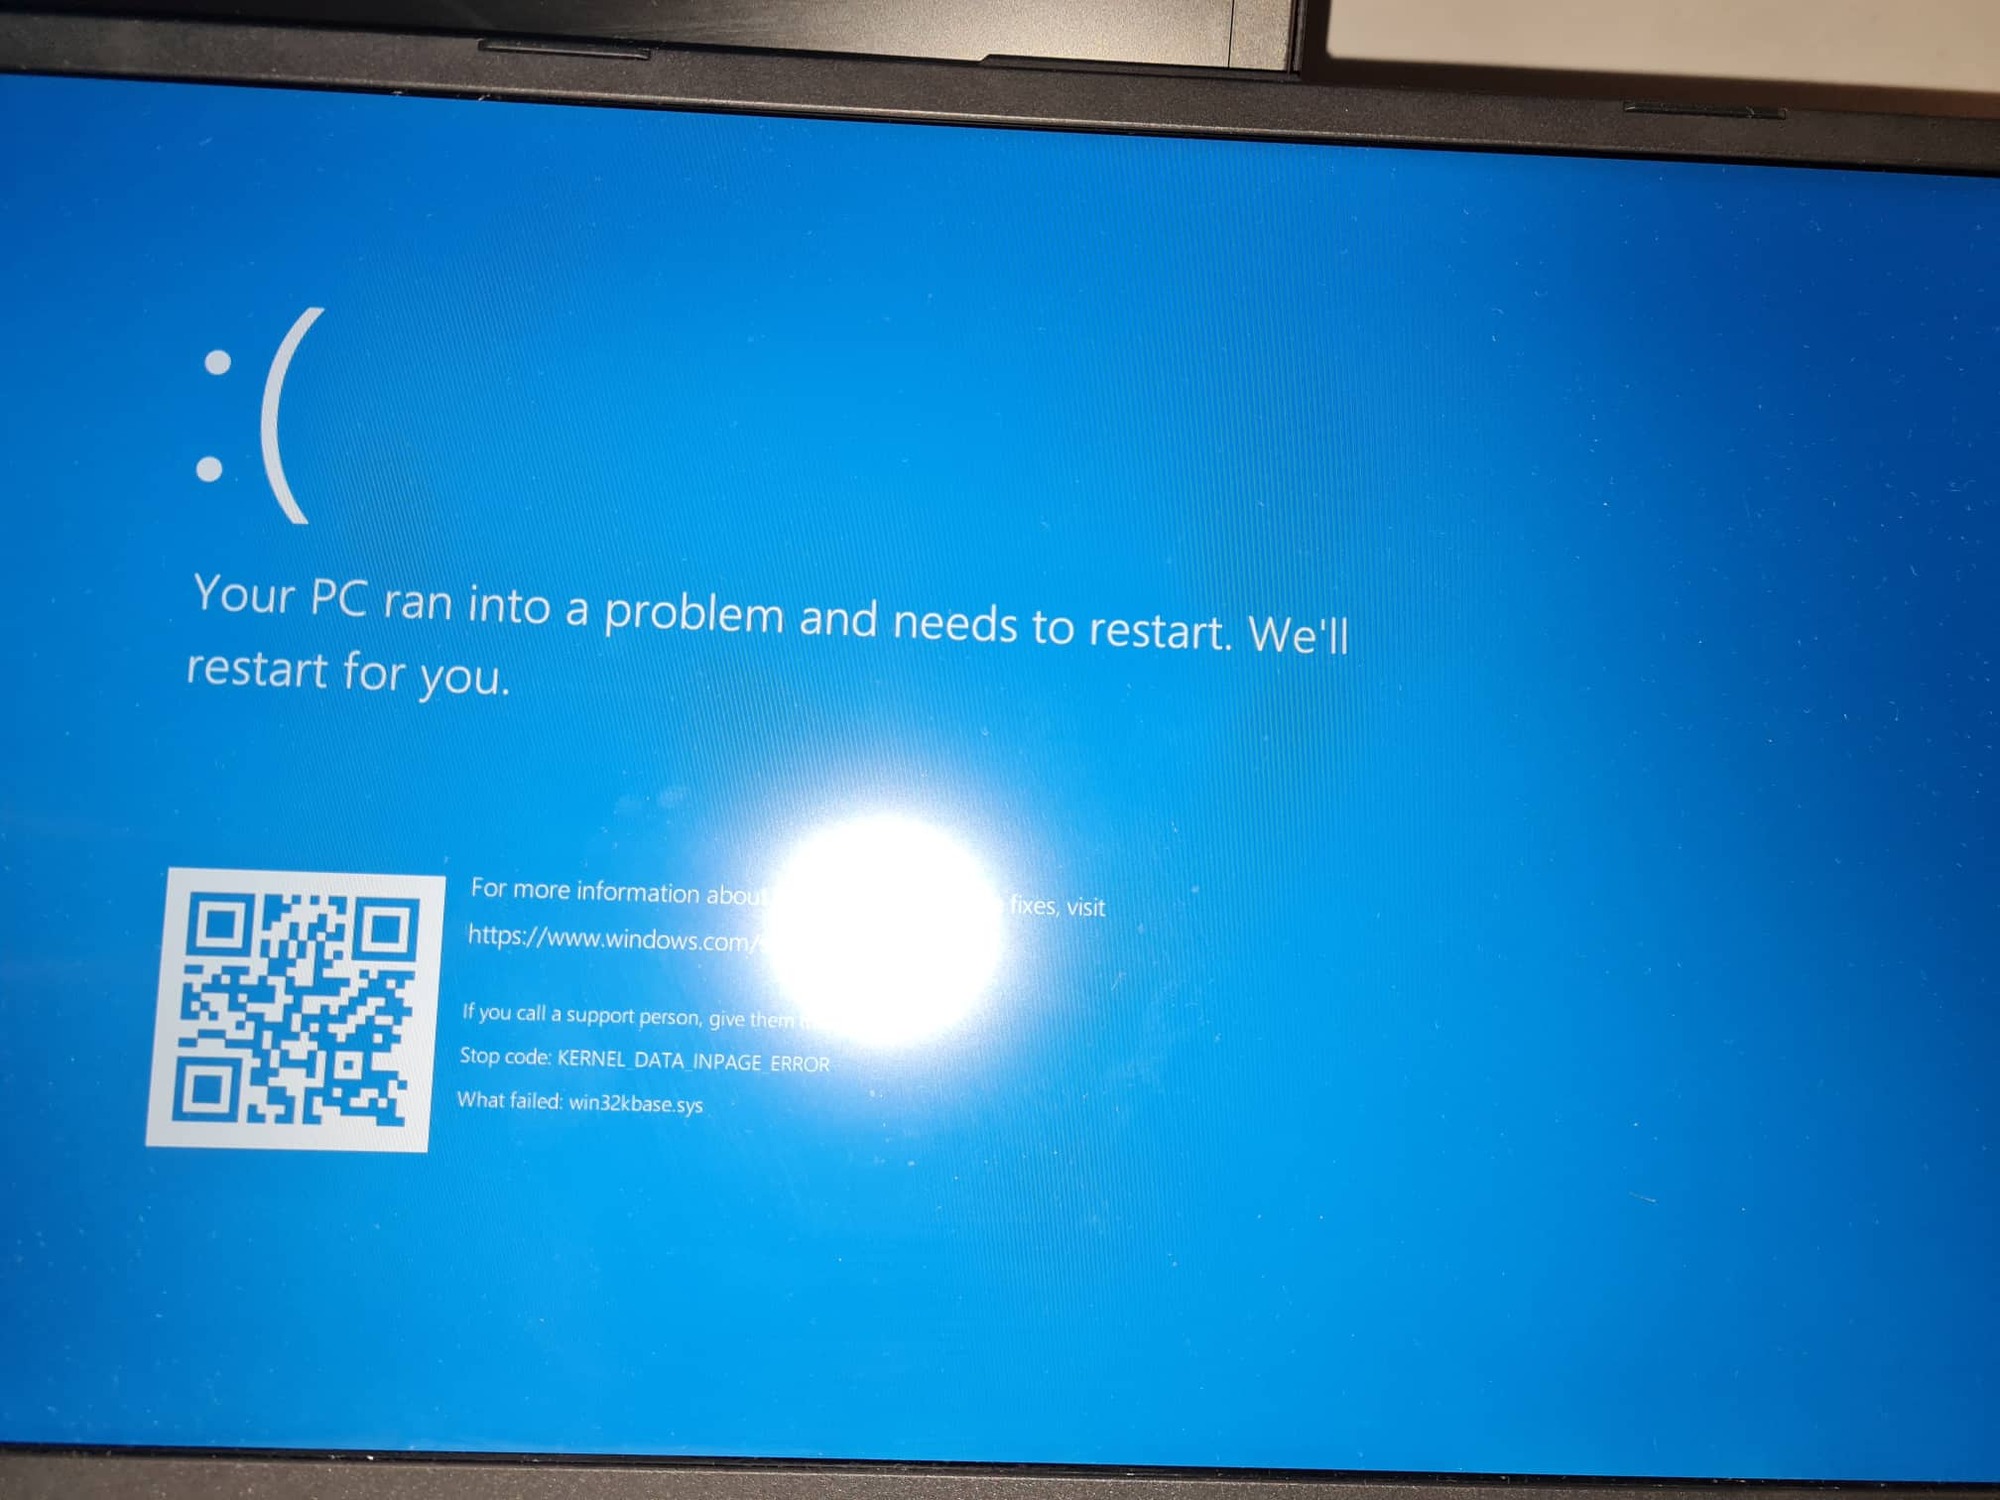 UNEXPECTED_STORE_EXCEPTION AND KERNEL_DATA_INPAGE_ERROR Blue Screens